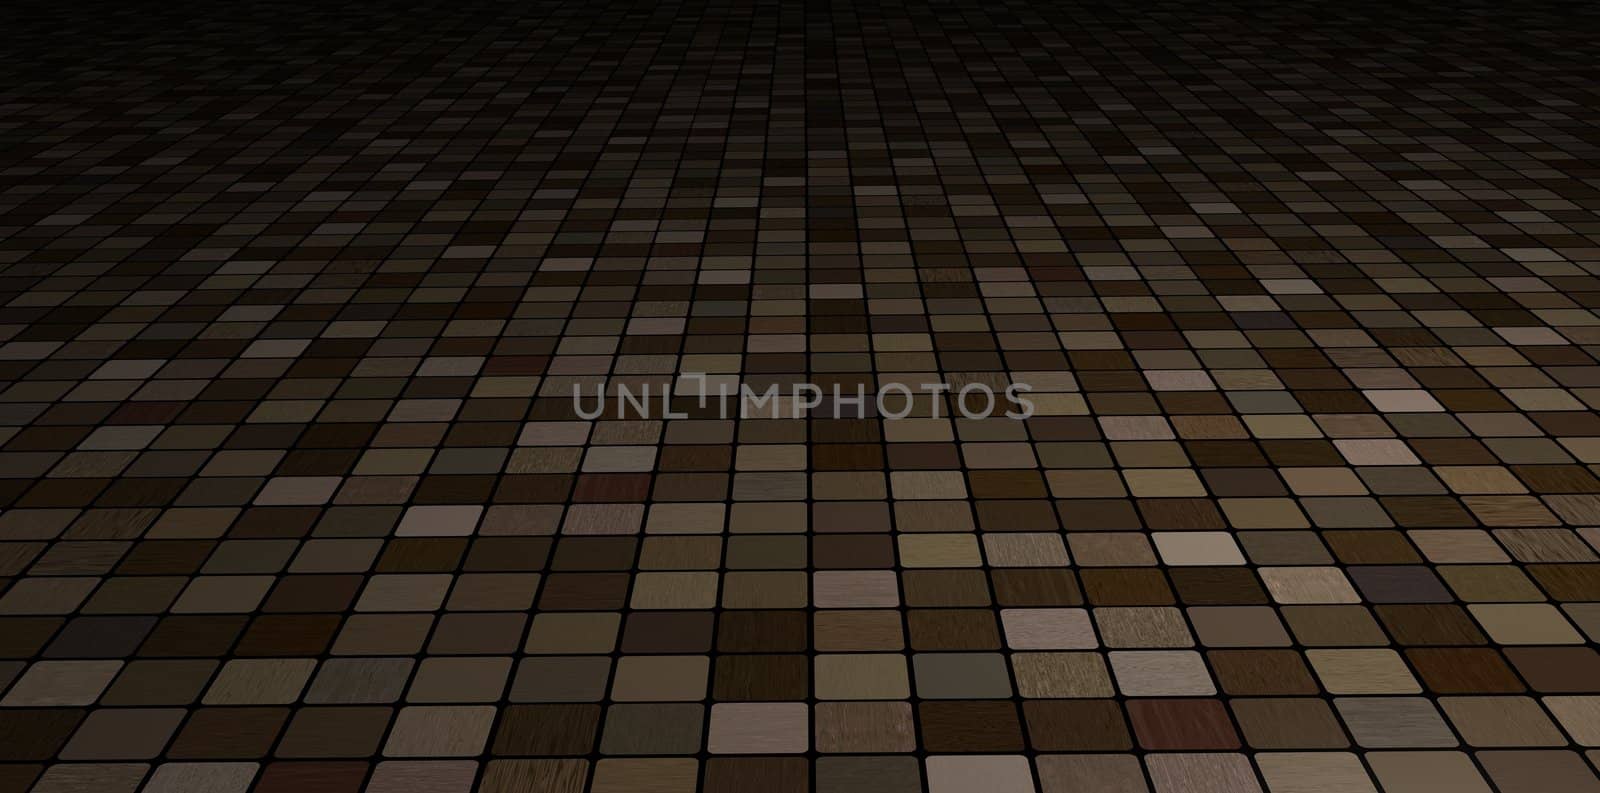 Illustrated Perspective floor made of wooden tiles